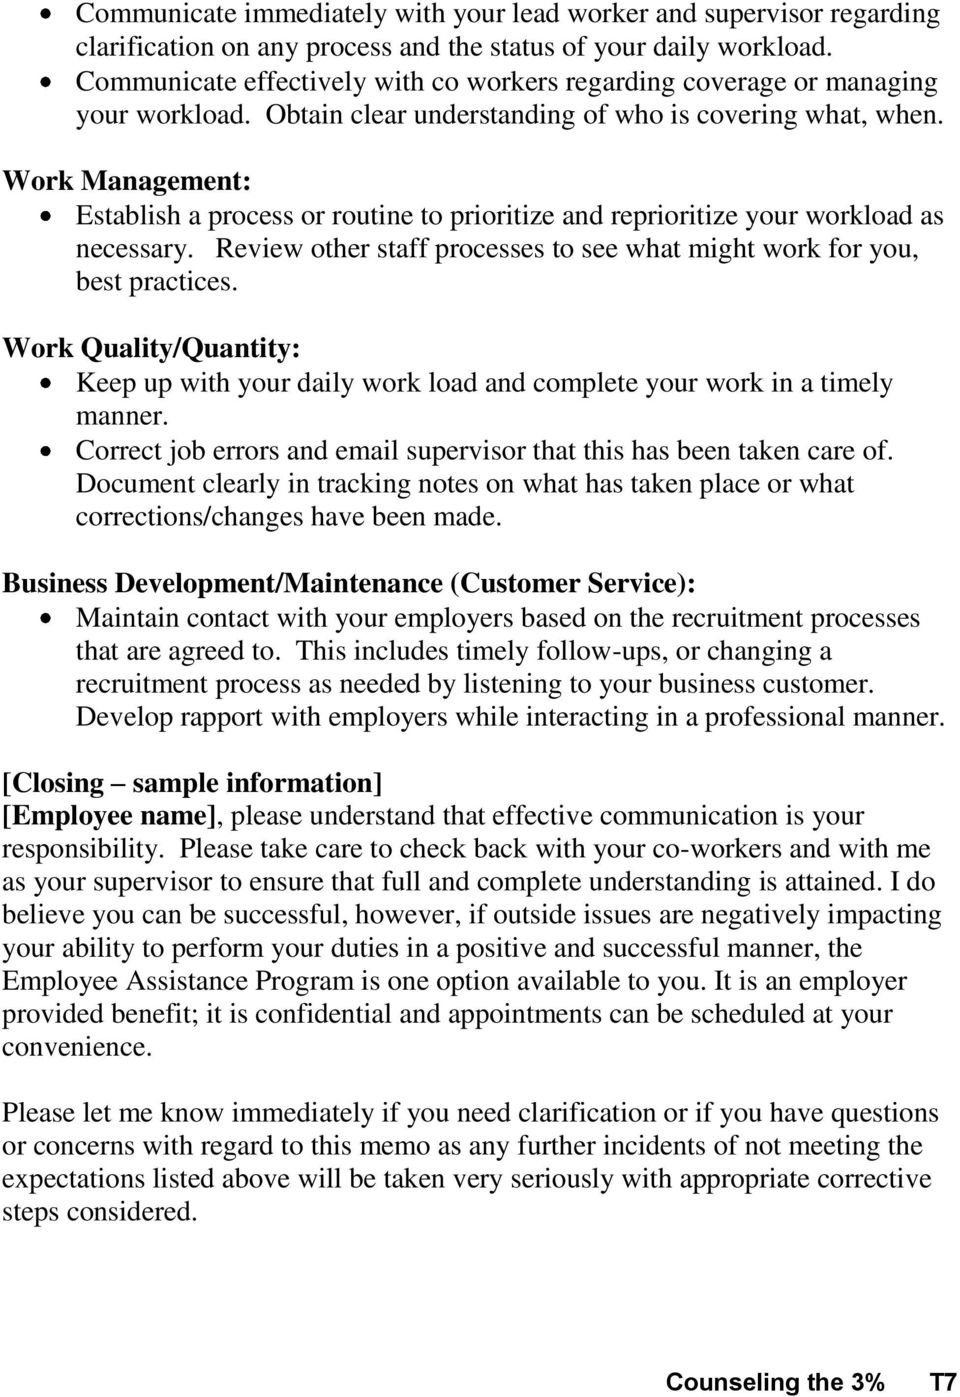 Letter Of Expectation From Employer from docplayer.net